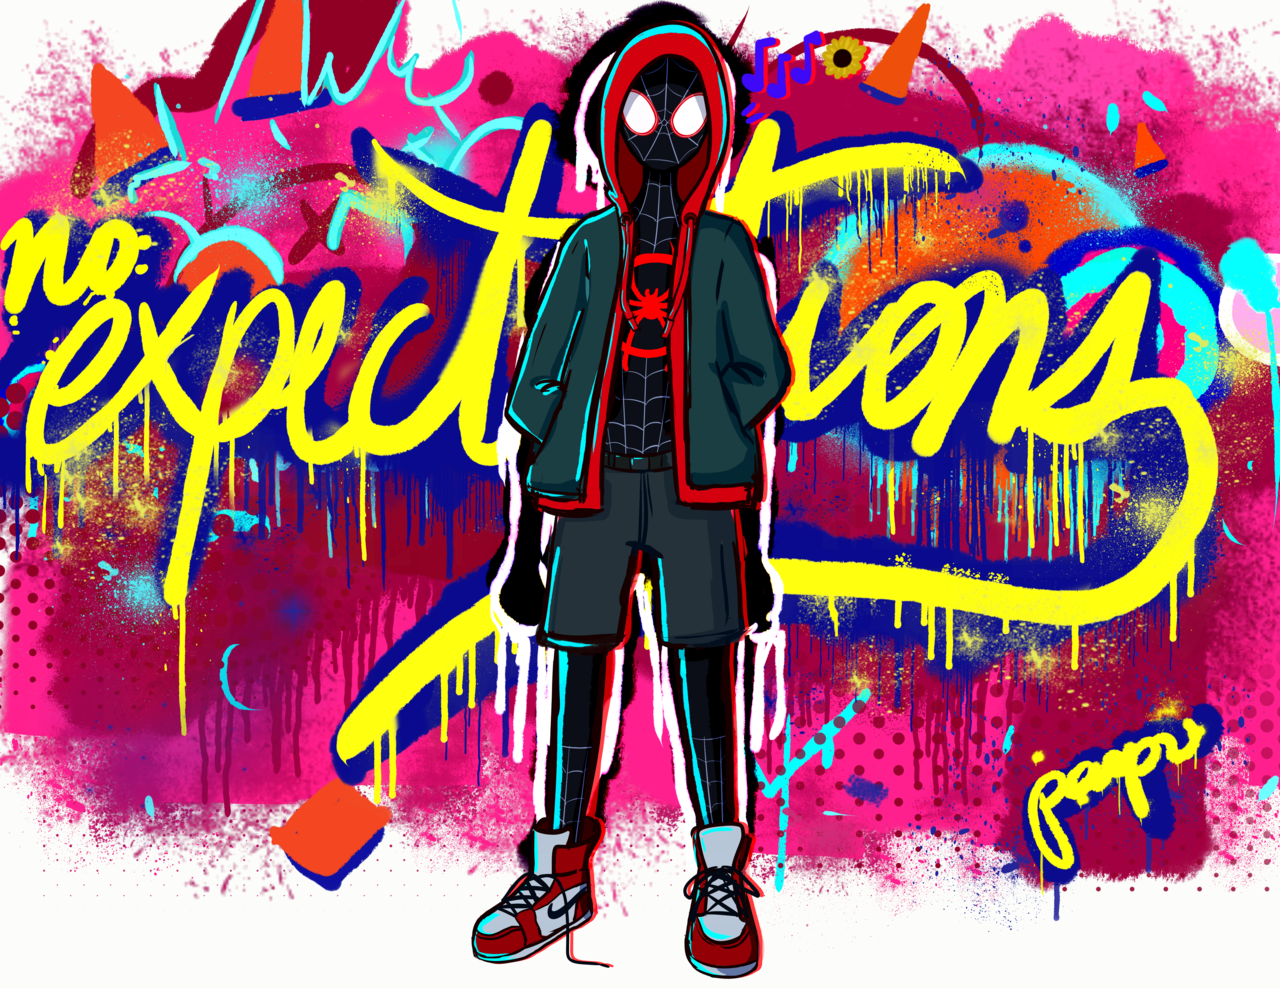 47 Spider Man Into The Spider Verse Expectations Graffiti Wallpaper